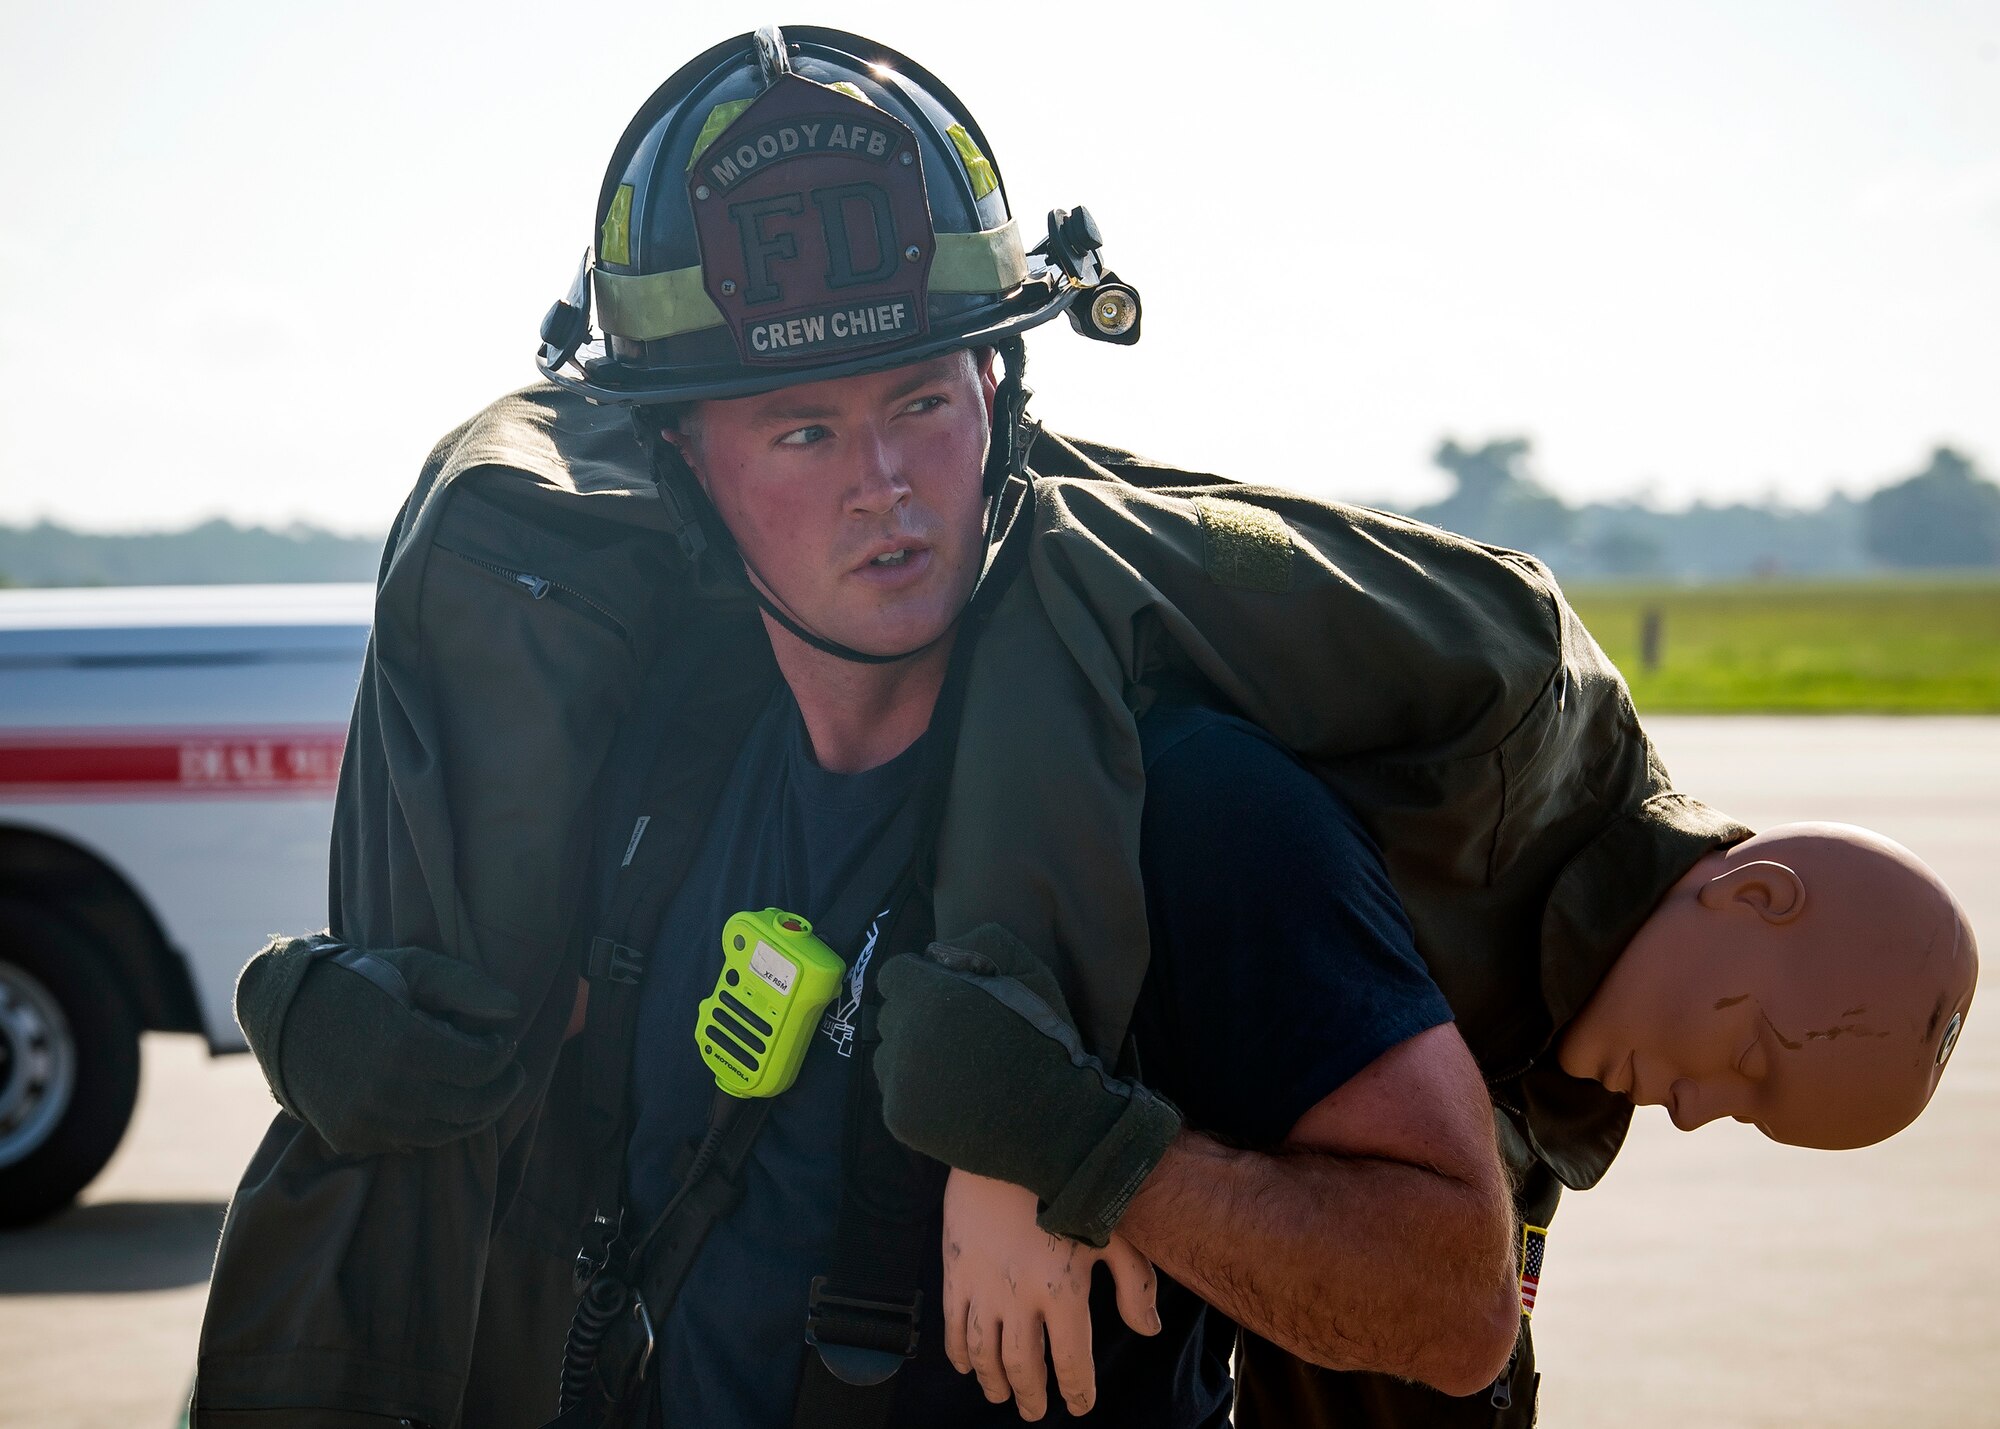 Donald Carey, 23d Civil Engineer Squadron (CES) crew chief, carries a simulated aircrew member during HC-130J Combat King II egress training, July 11, 2019, at Moody Air Force Base, Ga. Firefighters conducted the training to evaluate their overall knowledge and proficiency of how to properly shut down and rescue personnel from a C-130 during an emergency situation. The training required the firefighters to properly enter and ventilate the aircraft while conducting swift rescue techniques to safely locate and remove passengers from the aircraft. (U.S. Air Force photo by Airman 1st Class Eugene Oliver)